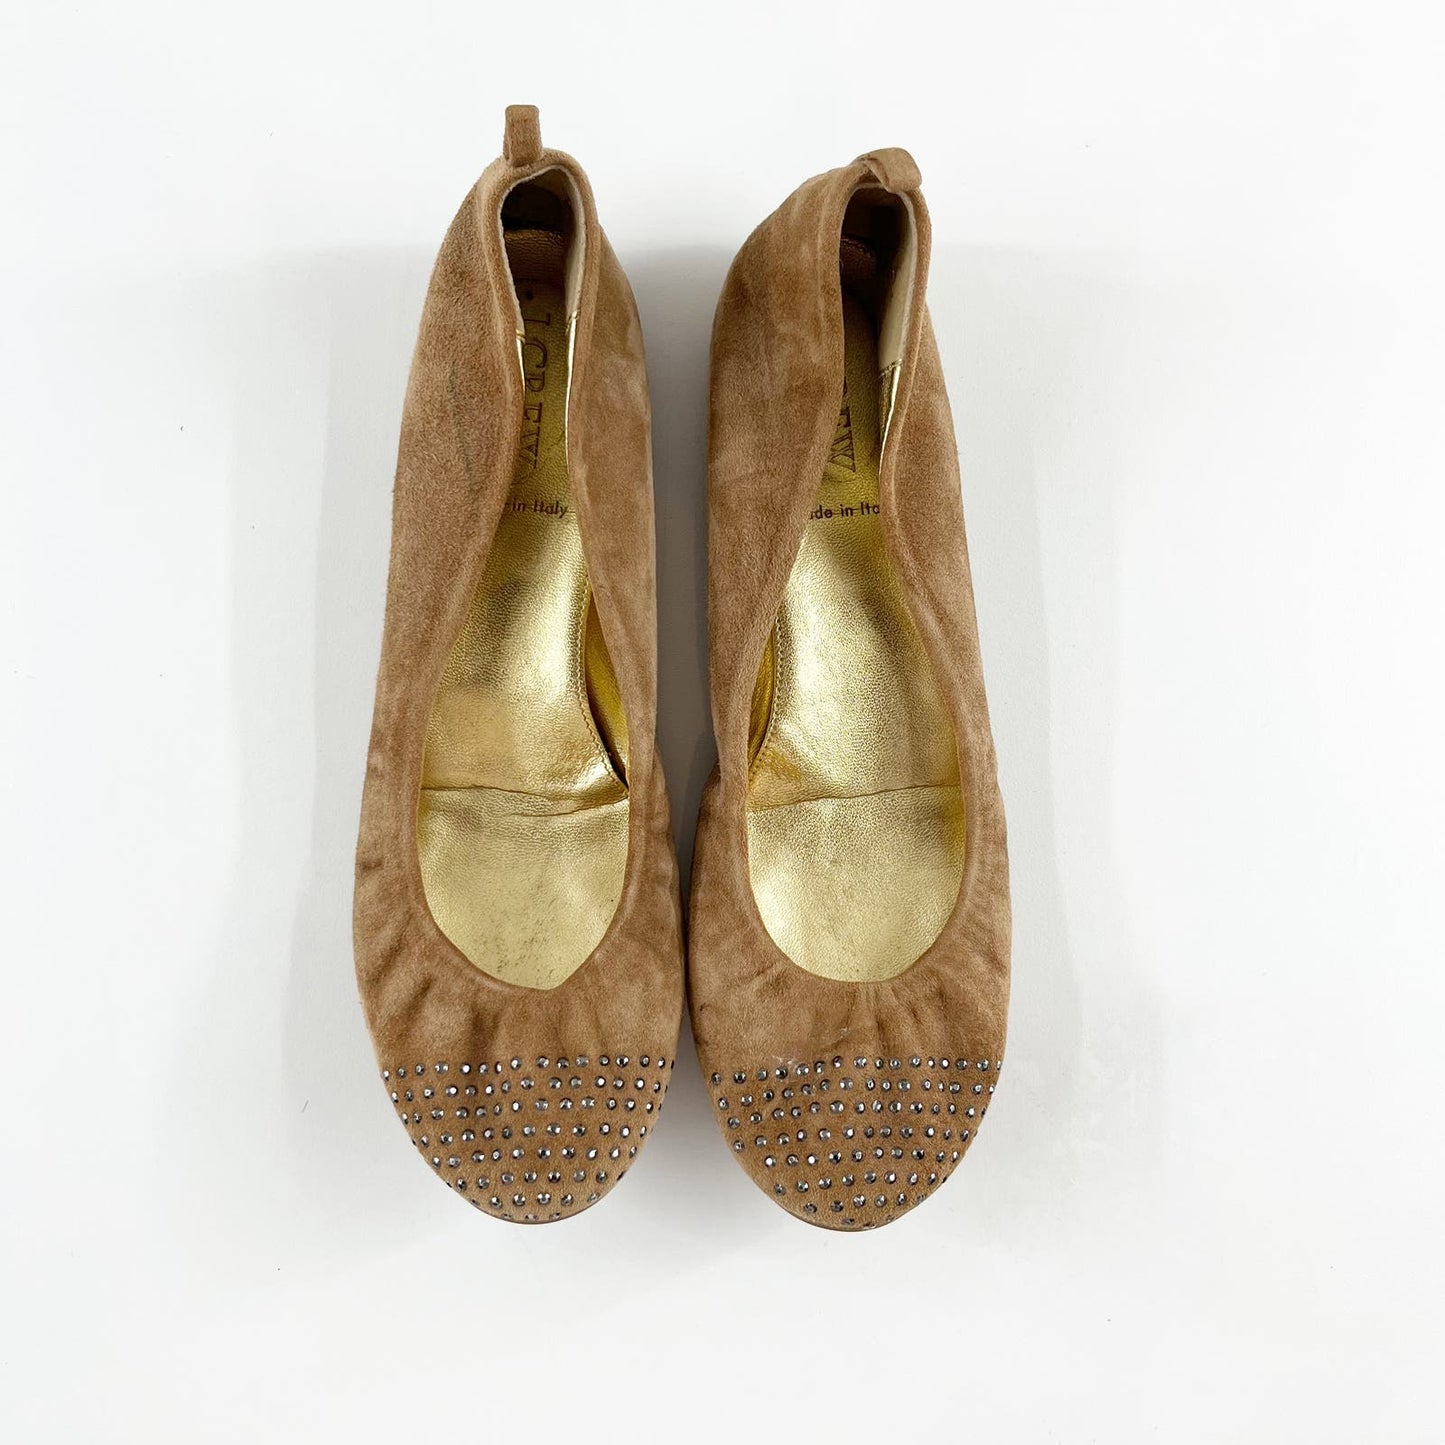 J. Crew Cece Studded Suede Leather Ballet Flats Brown 7.5